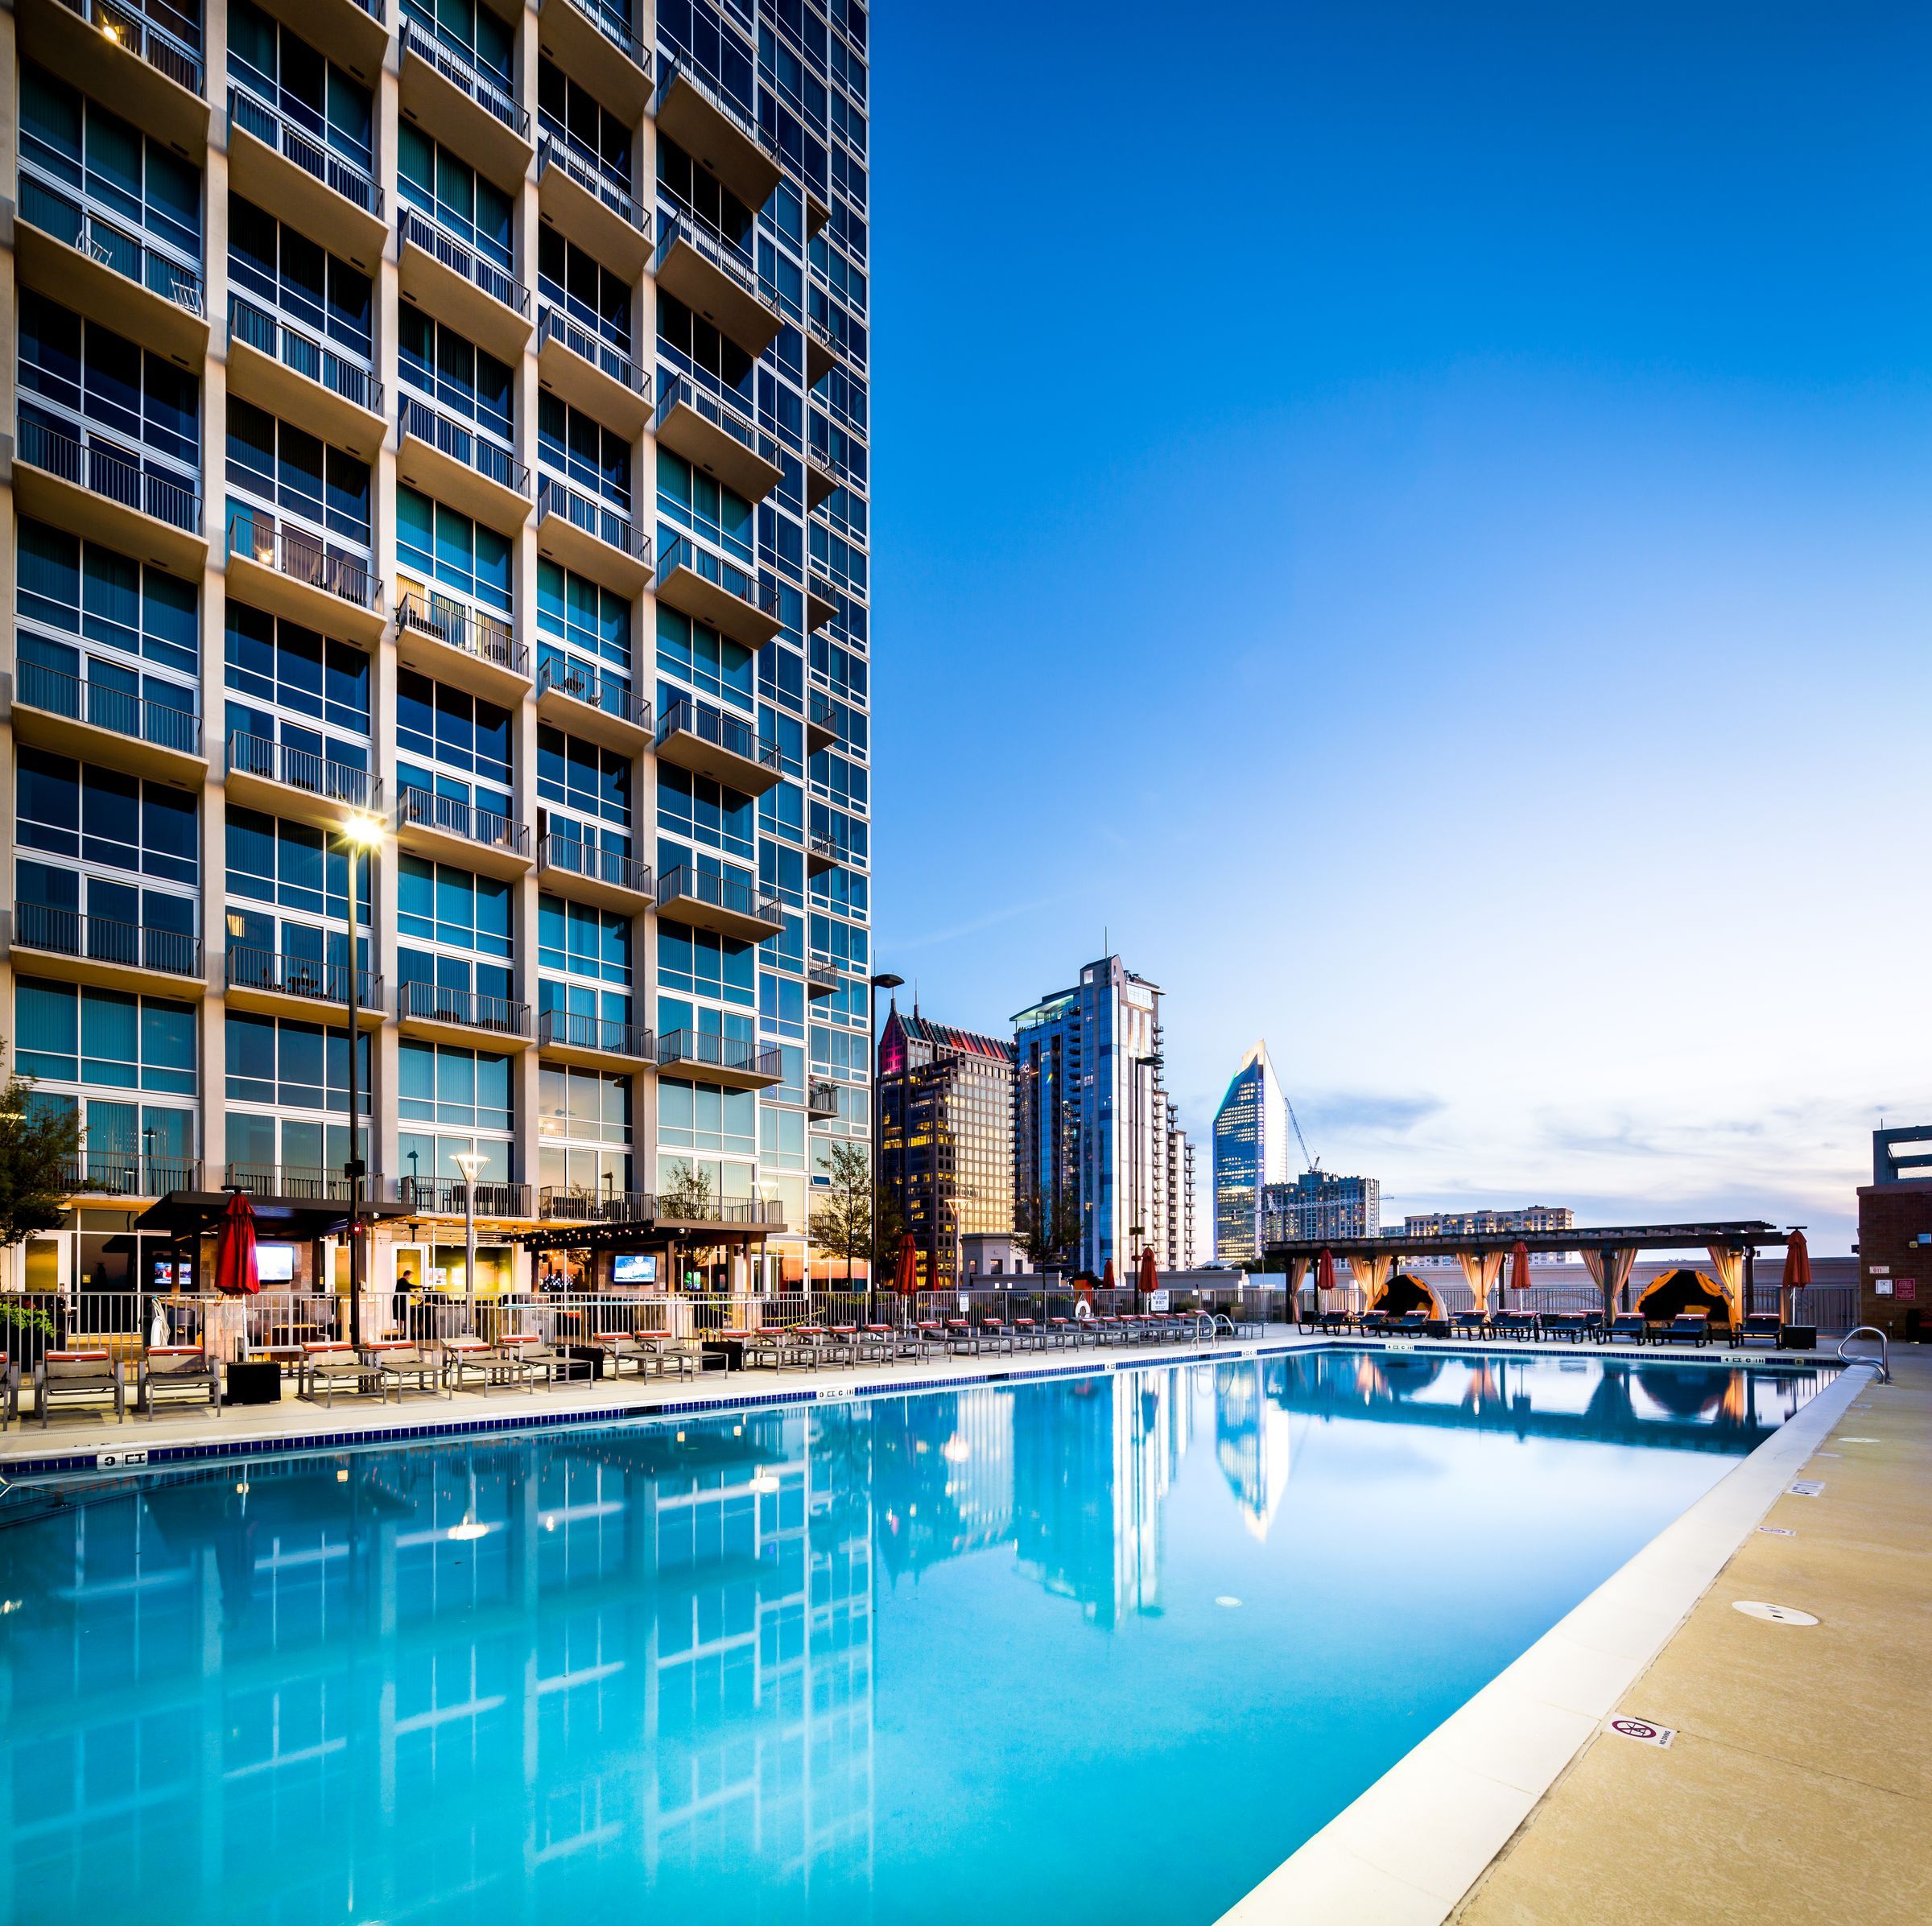 The Vue Charlotte rooftop luxury pool with surrounding outdoor lounge area